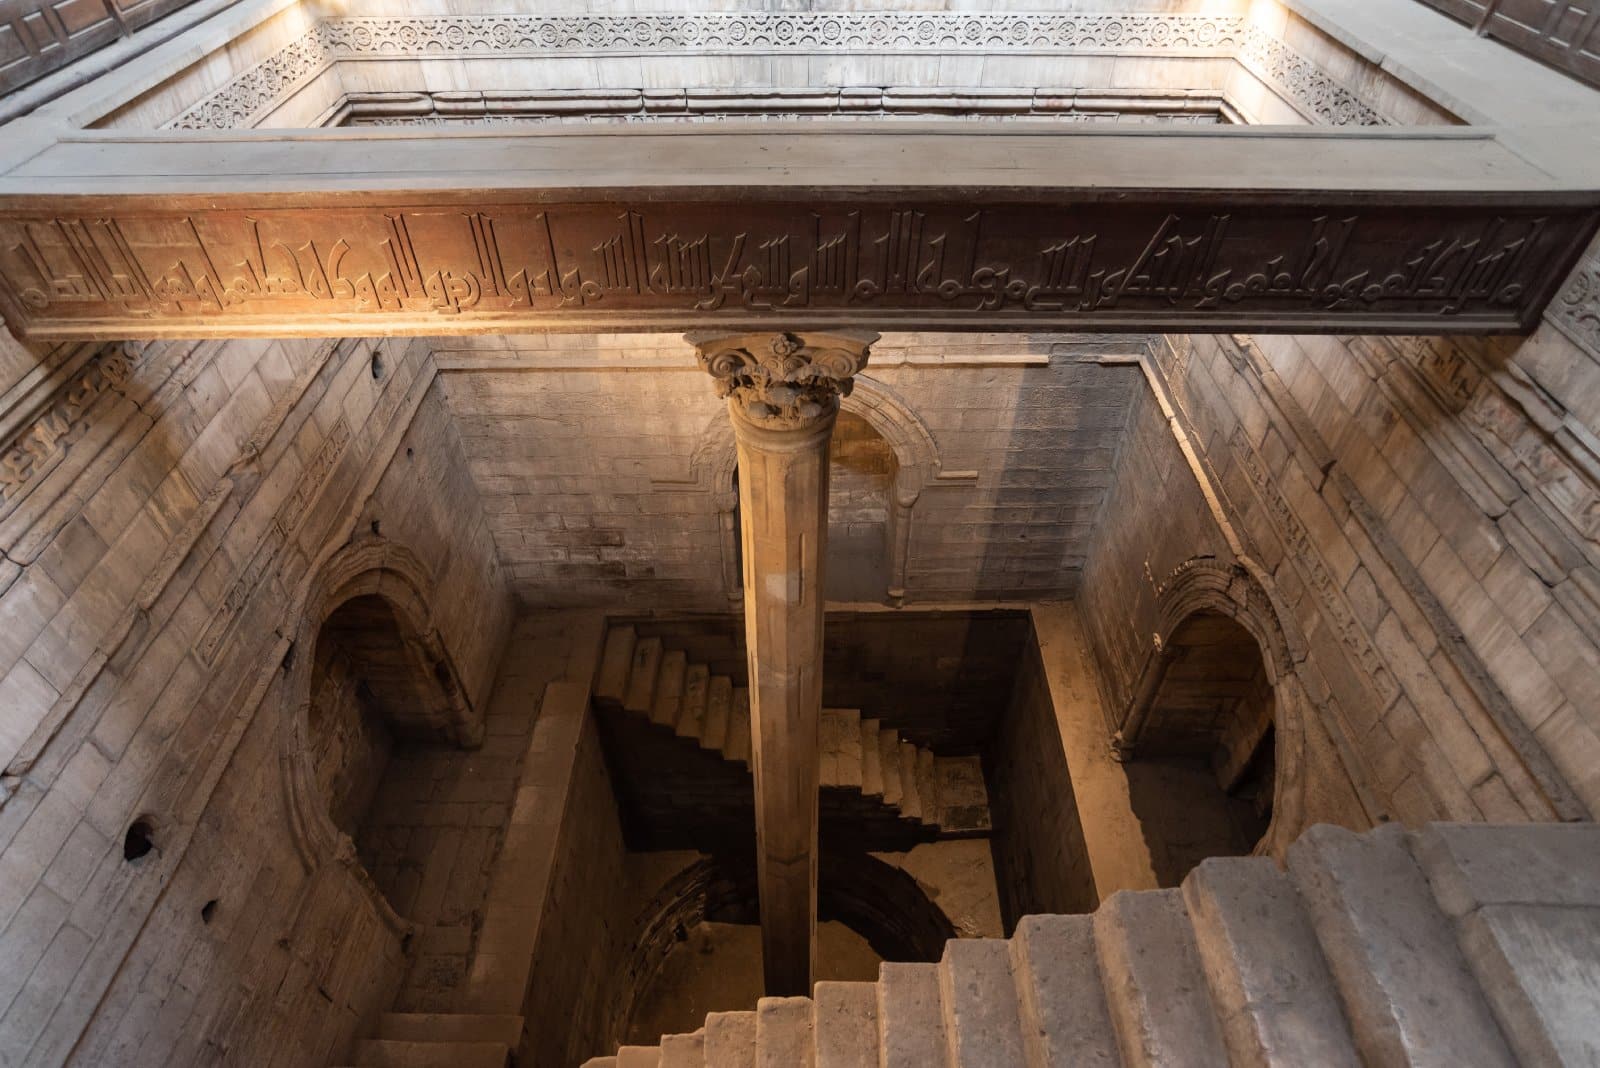 <p class="wp-caption-text">Image Credit: Shutterstock / John Wreford</p>  <p><span>The Nilometer on Rhoda Island is an ancient architectural marvel designed to measure the Nile River’s water levels. Dating back to the 9th century, this device was crucial for predicting the annual flooding, which was essential for agricultural planning in Egypt. The Nilometer consists of a deep well and a graduated column, allowing accurate readings of the river’s height. This site highlights the historical importance of the Nile to Egyptian civilization but also represents one of the earliest forms of scientific measurement. The Nilometer is a testament to the advanced understanding of hydrology and engineering in medieval Islamic society.</span></p>